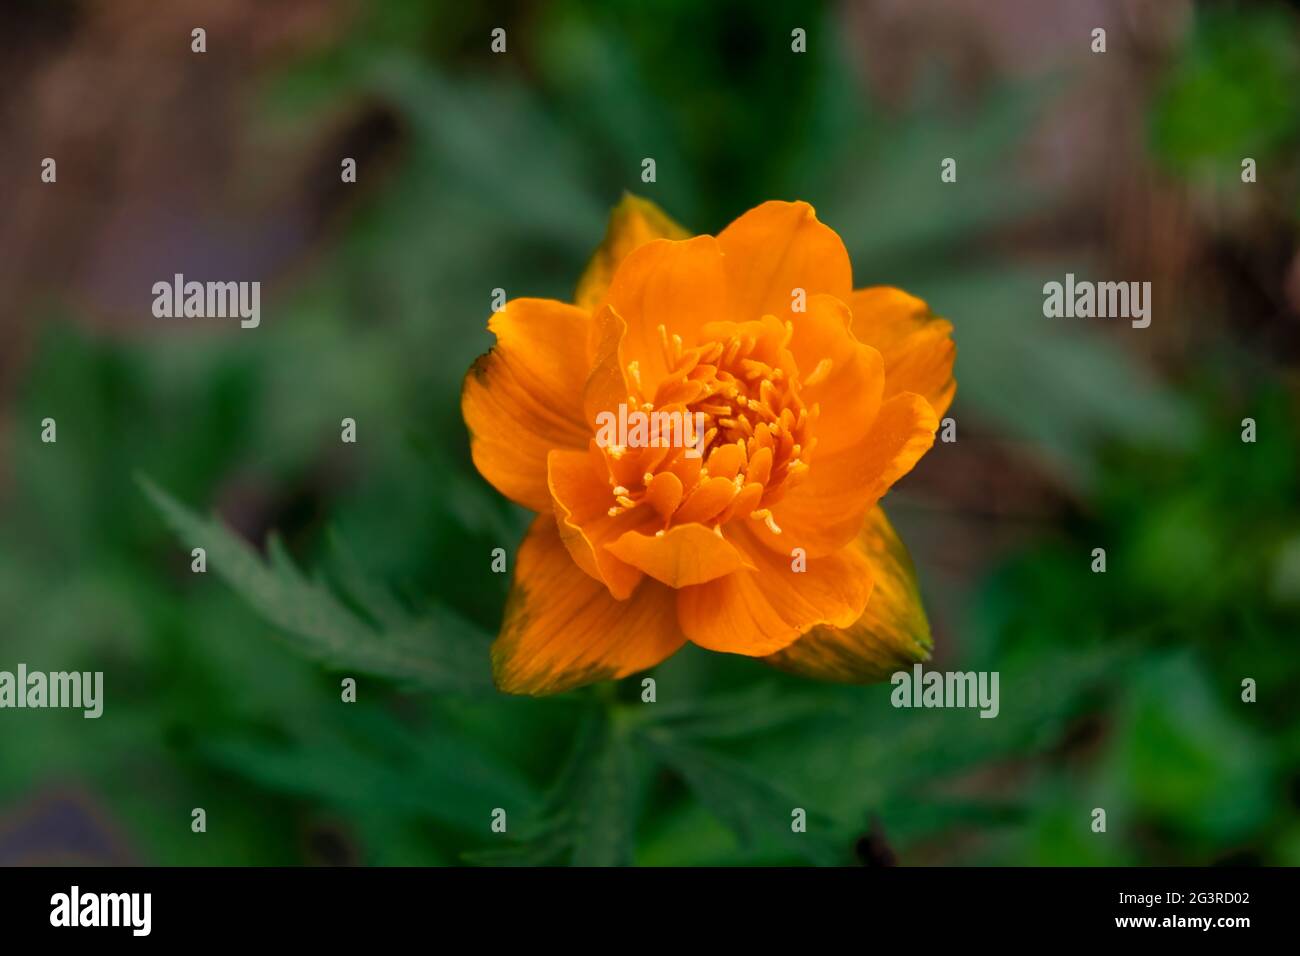 Orange flowers of Asian Globeflower Trollius asiaticus on a blurred background. Selective focus. Stock Photo